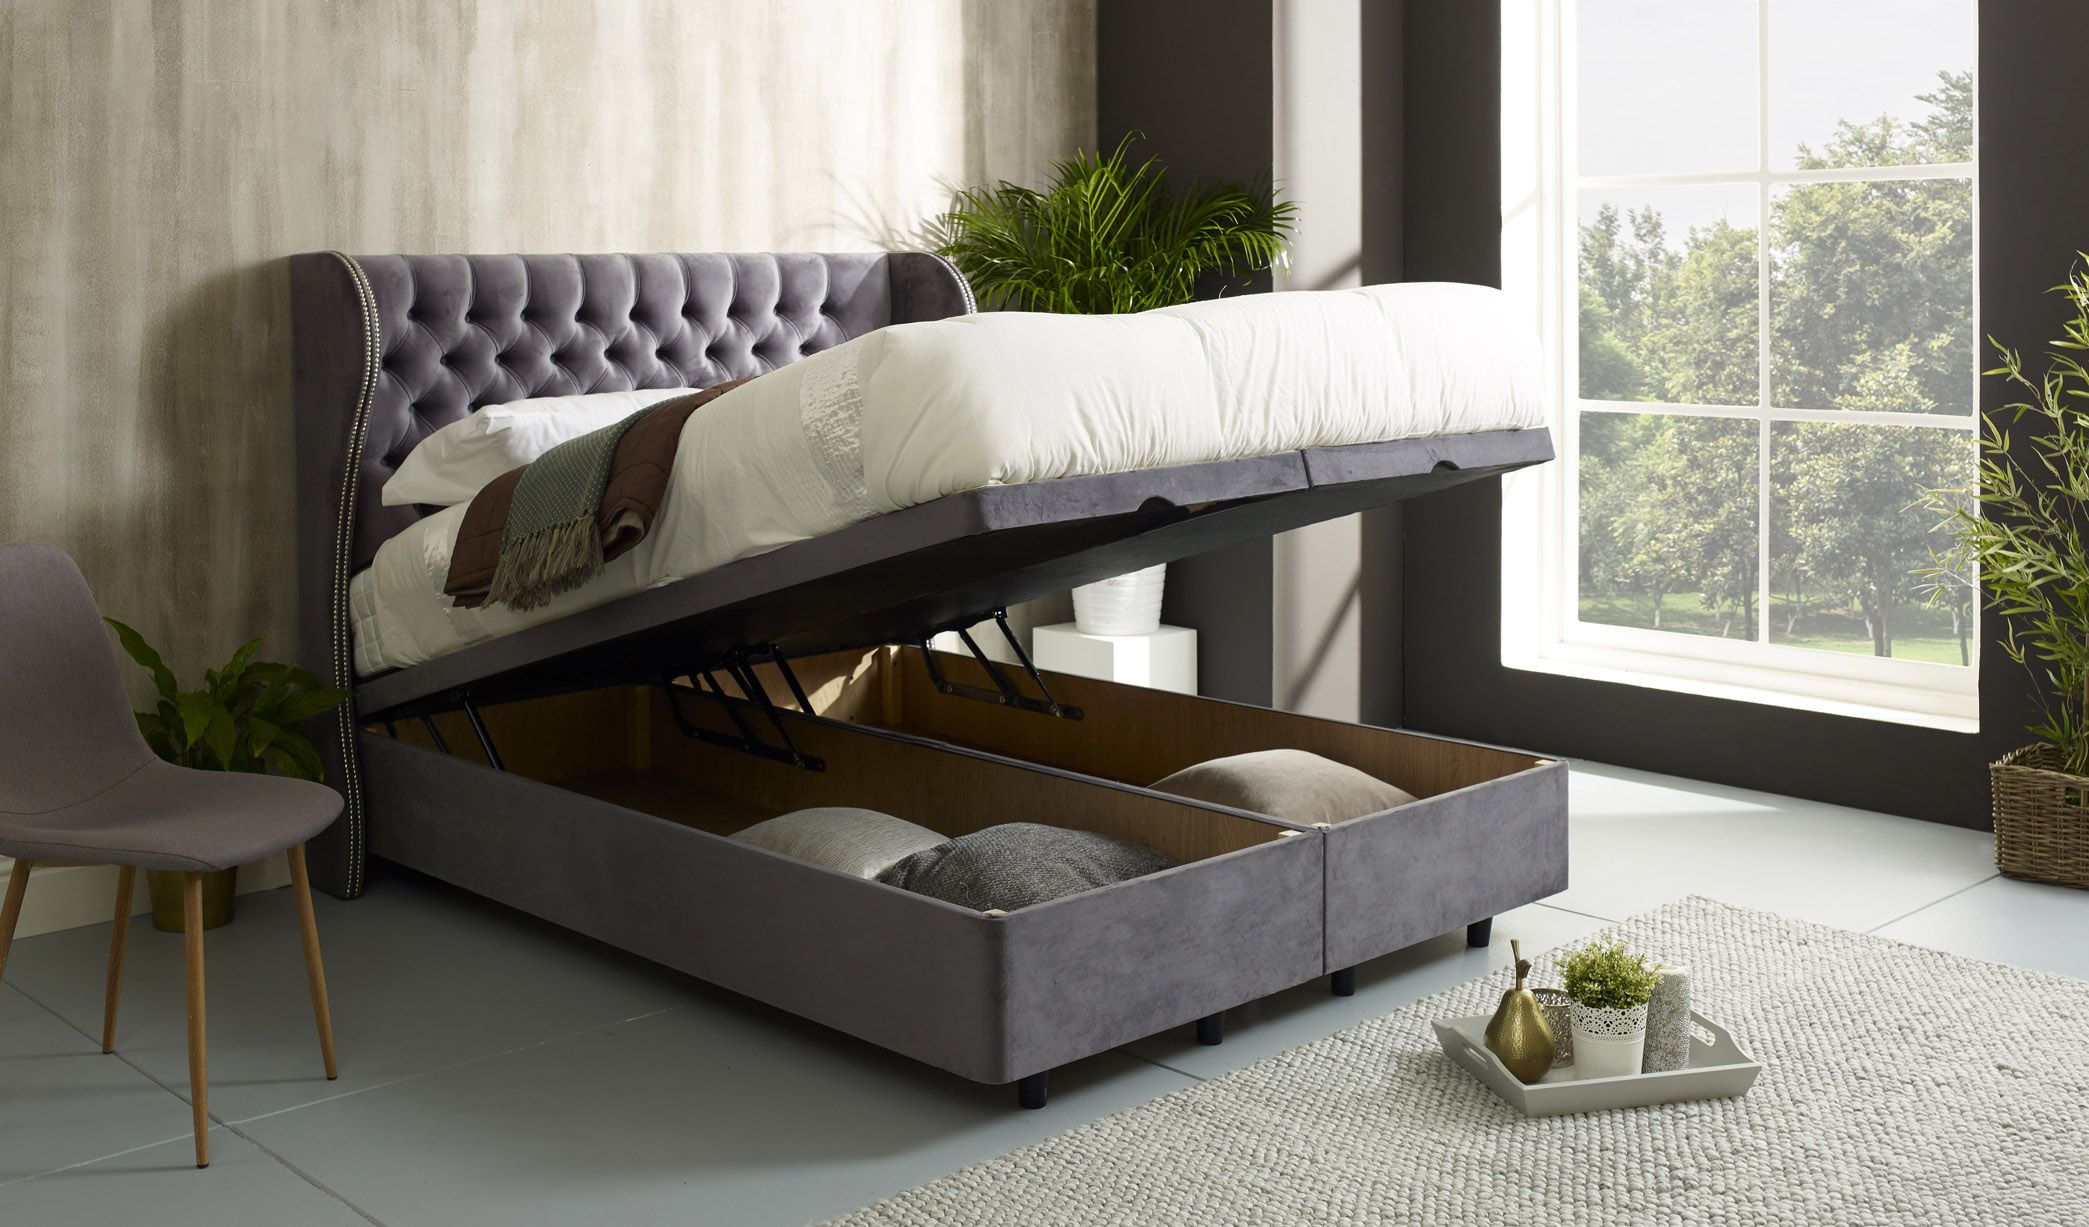 Giovana Wing Floating Ottoman Bed Frame With Studs – Bedworld Within Floating Ottomans (Gallery 7 of 20)